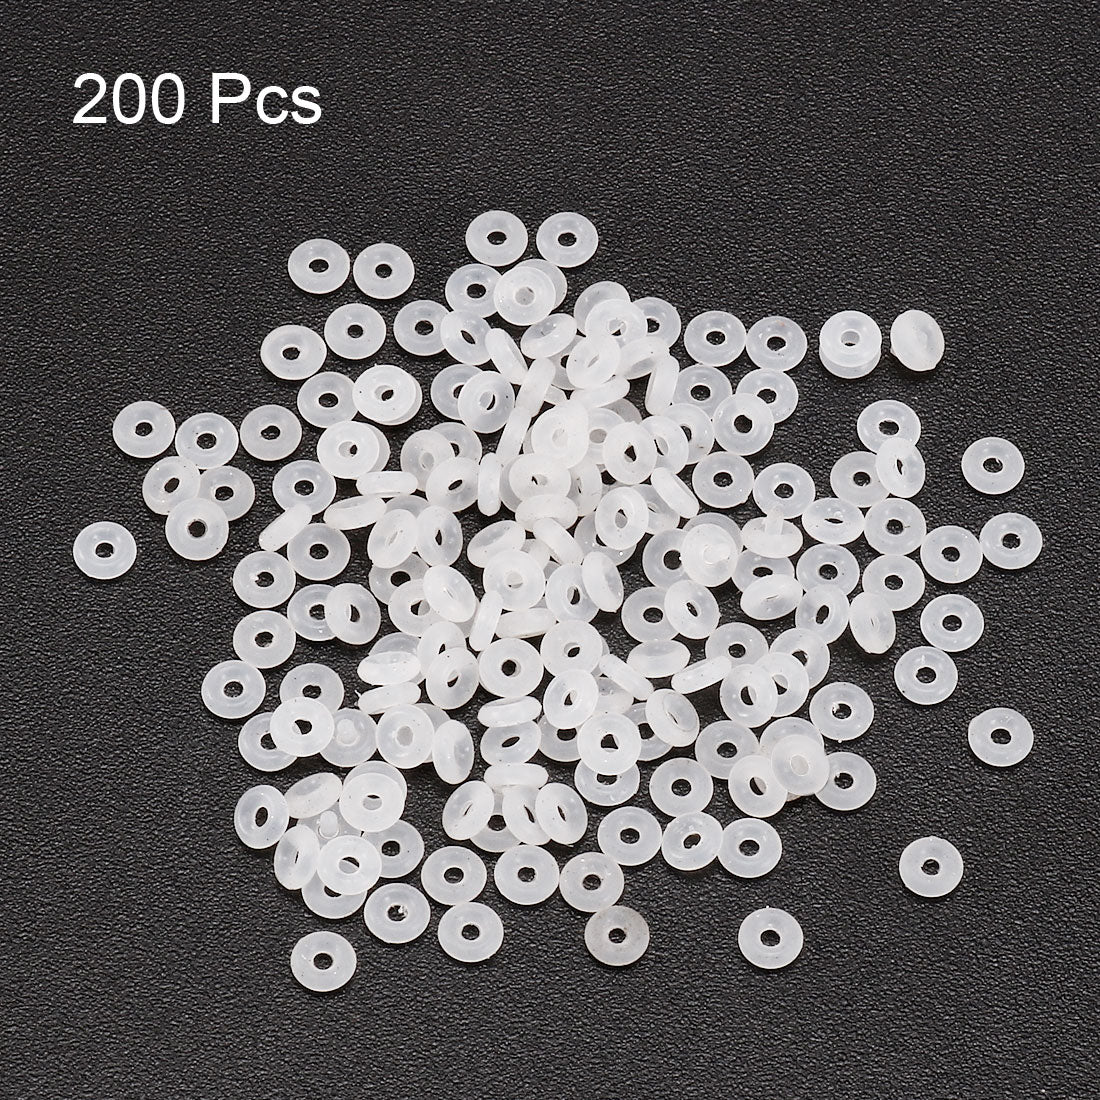 uxcell Uxcell Valve  Bearing Pneumatic Pump Gasket Silicone Sealing Rings 3mm x 1mm 200 Pcs